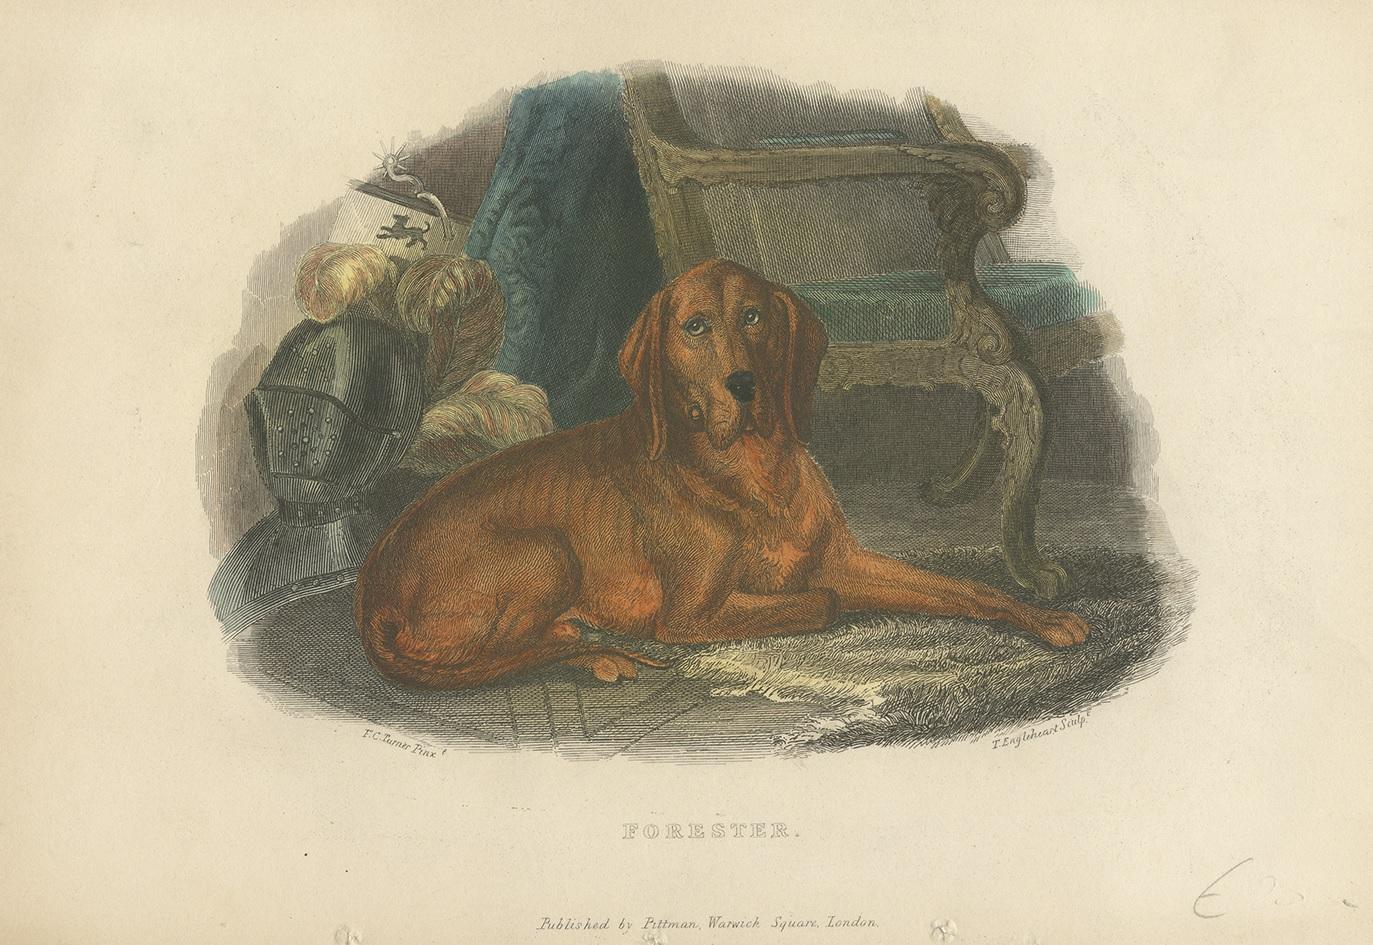 Antique print titled 'Forester'. This print depicts a hound dog. Published by Pittman, circa 1835.